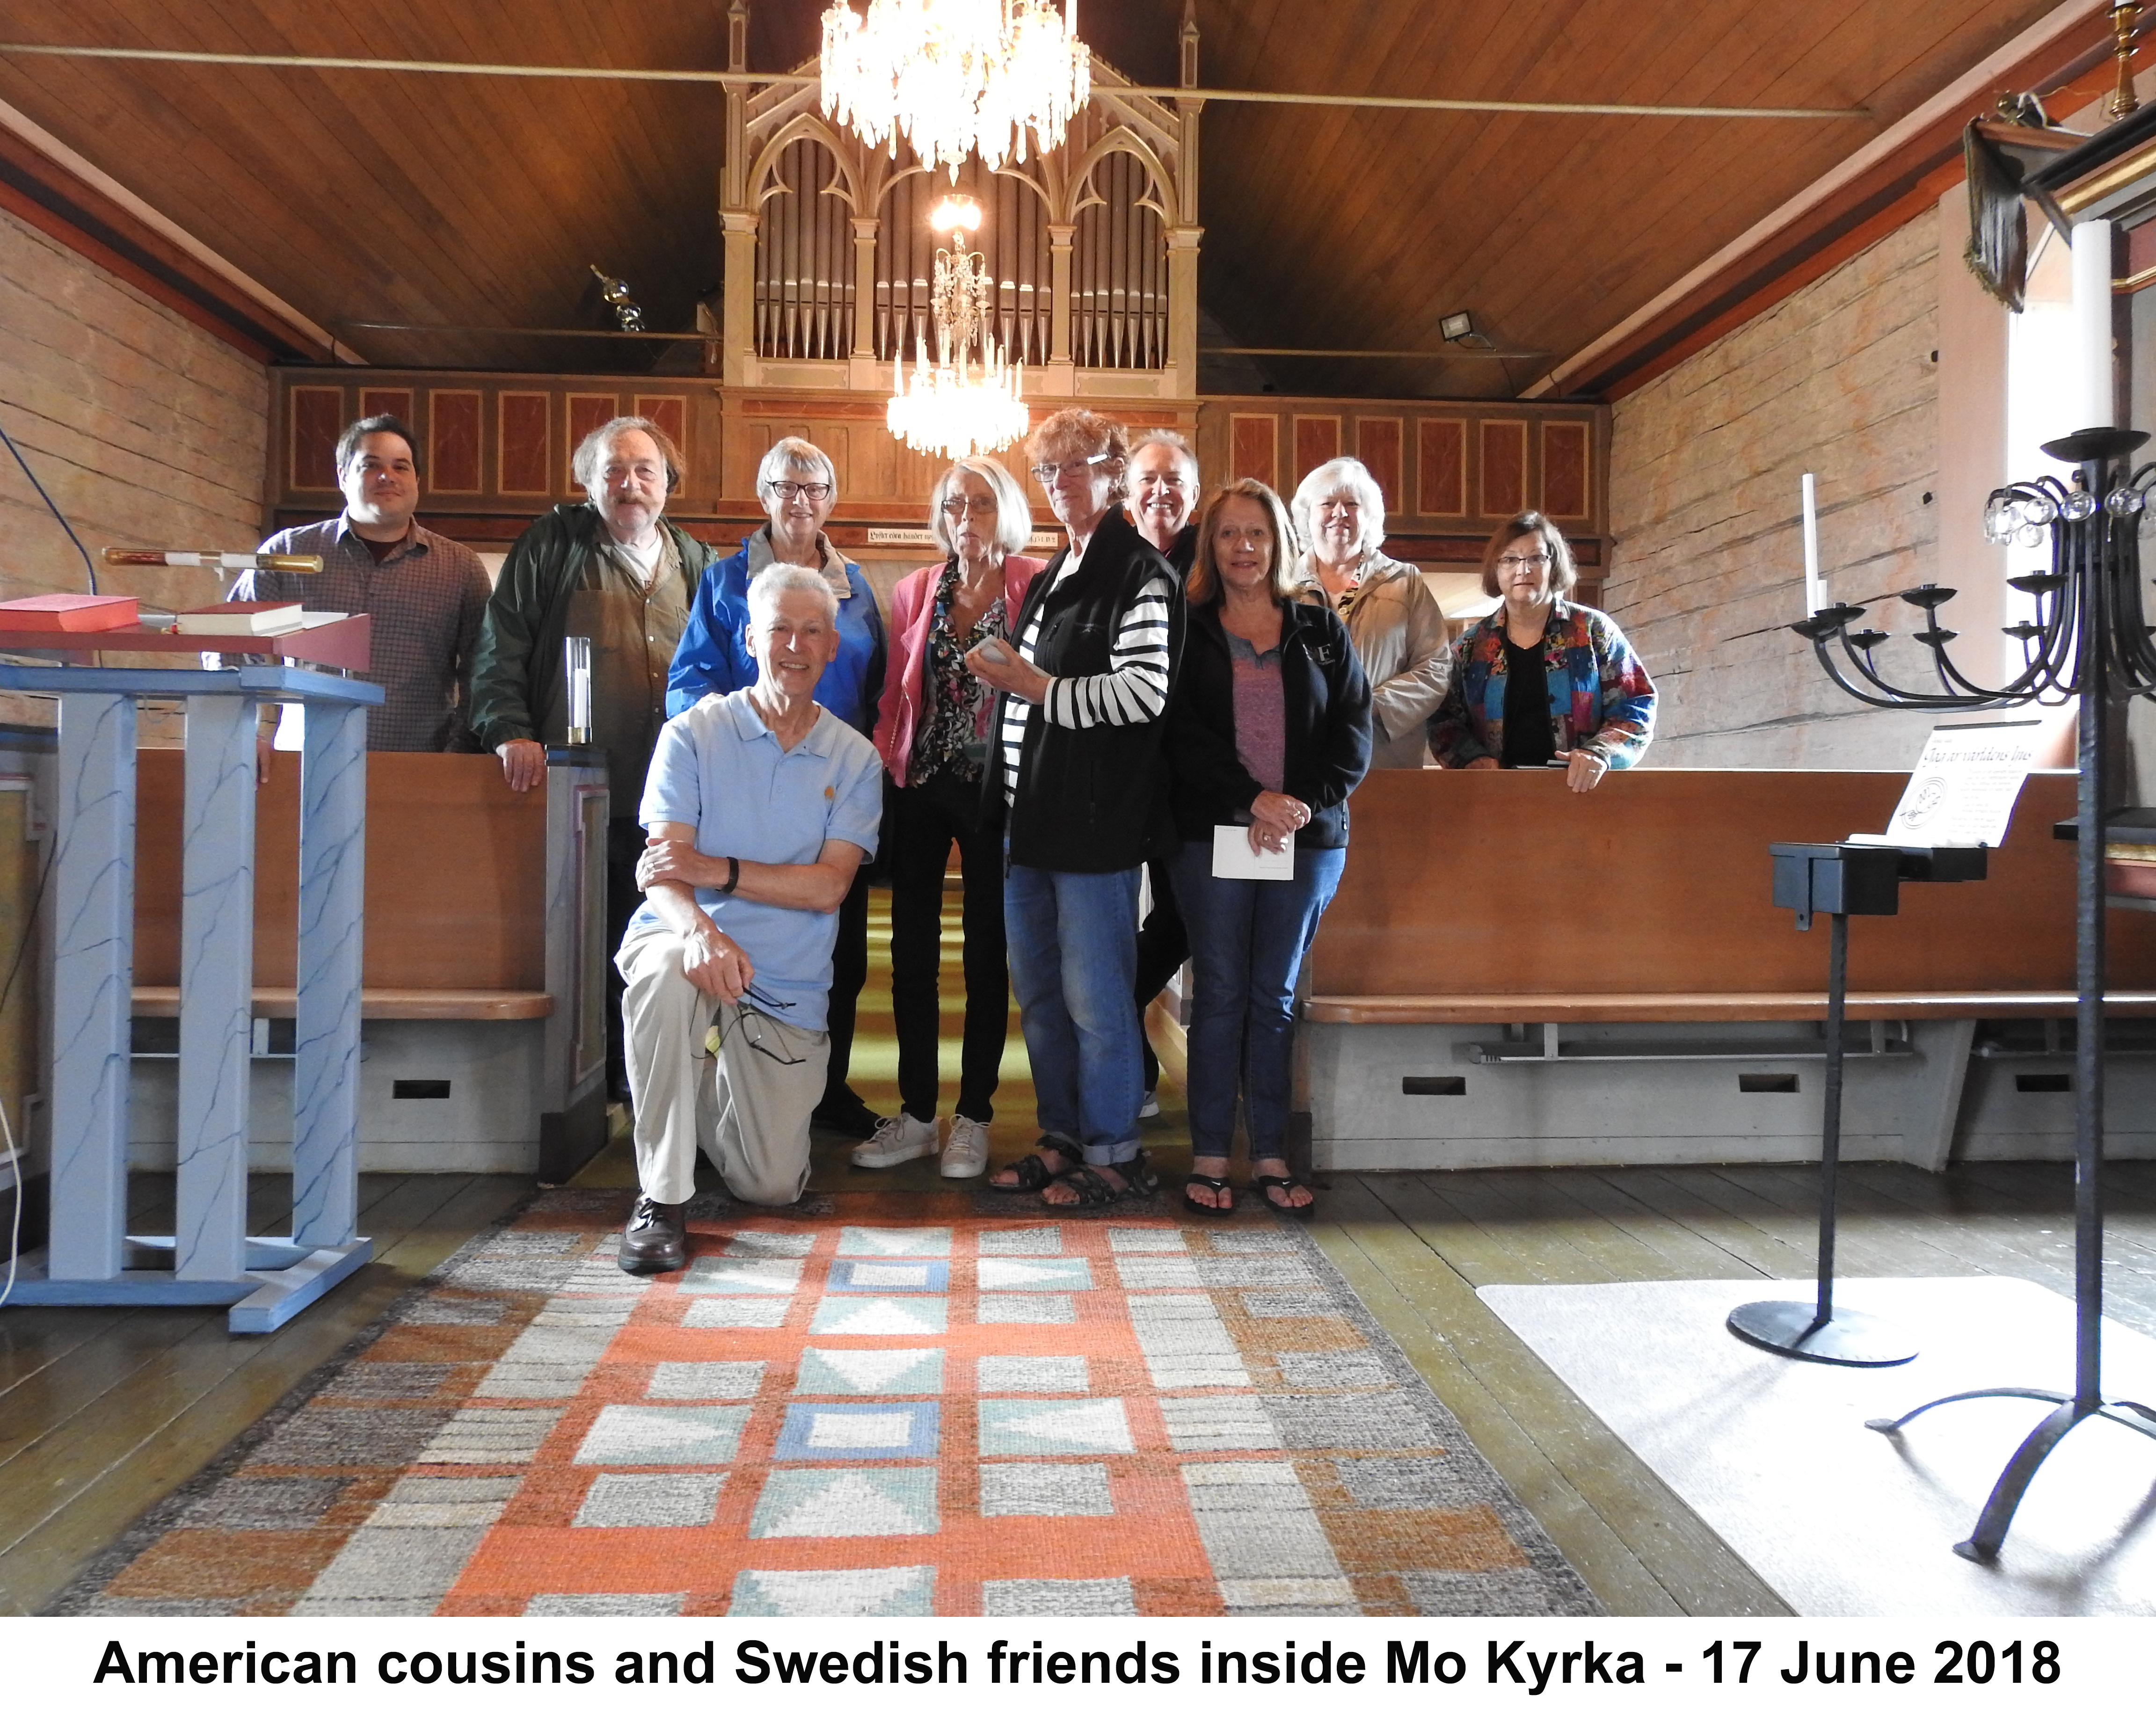 The American cousins with Swedes  Laila Falk and Brita Ivarsson. In the
             background are the organ pipes and the paintings of Jesus and the disciples